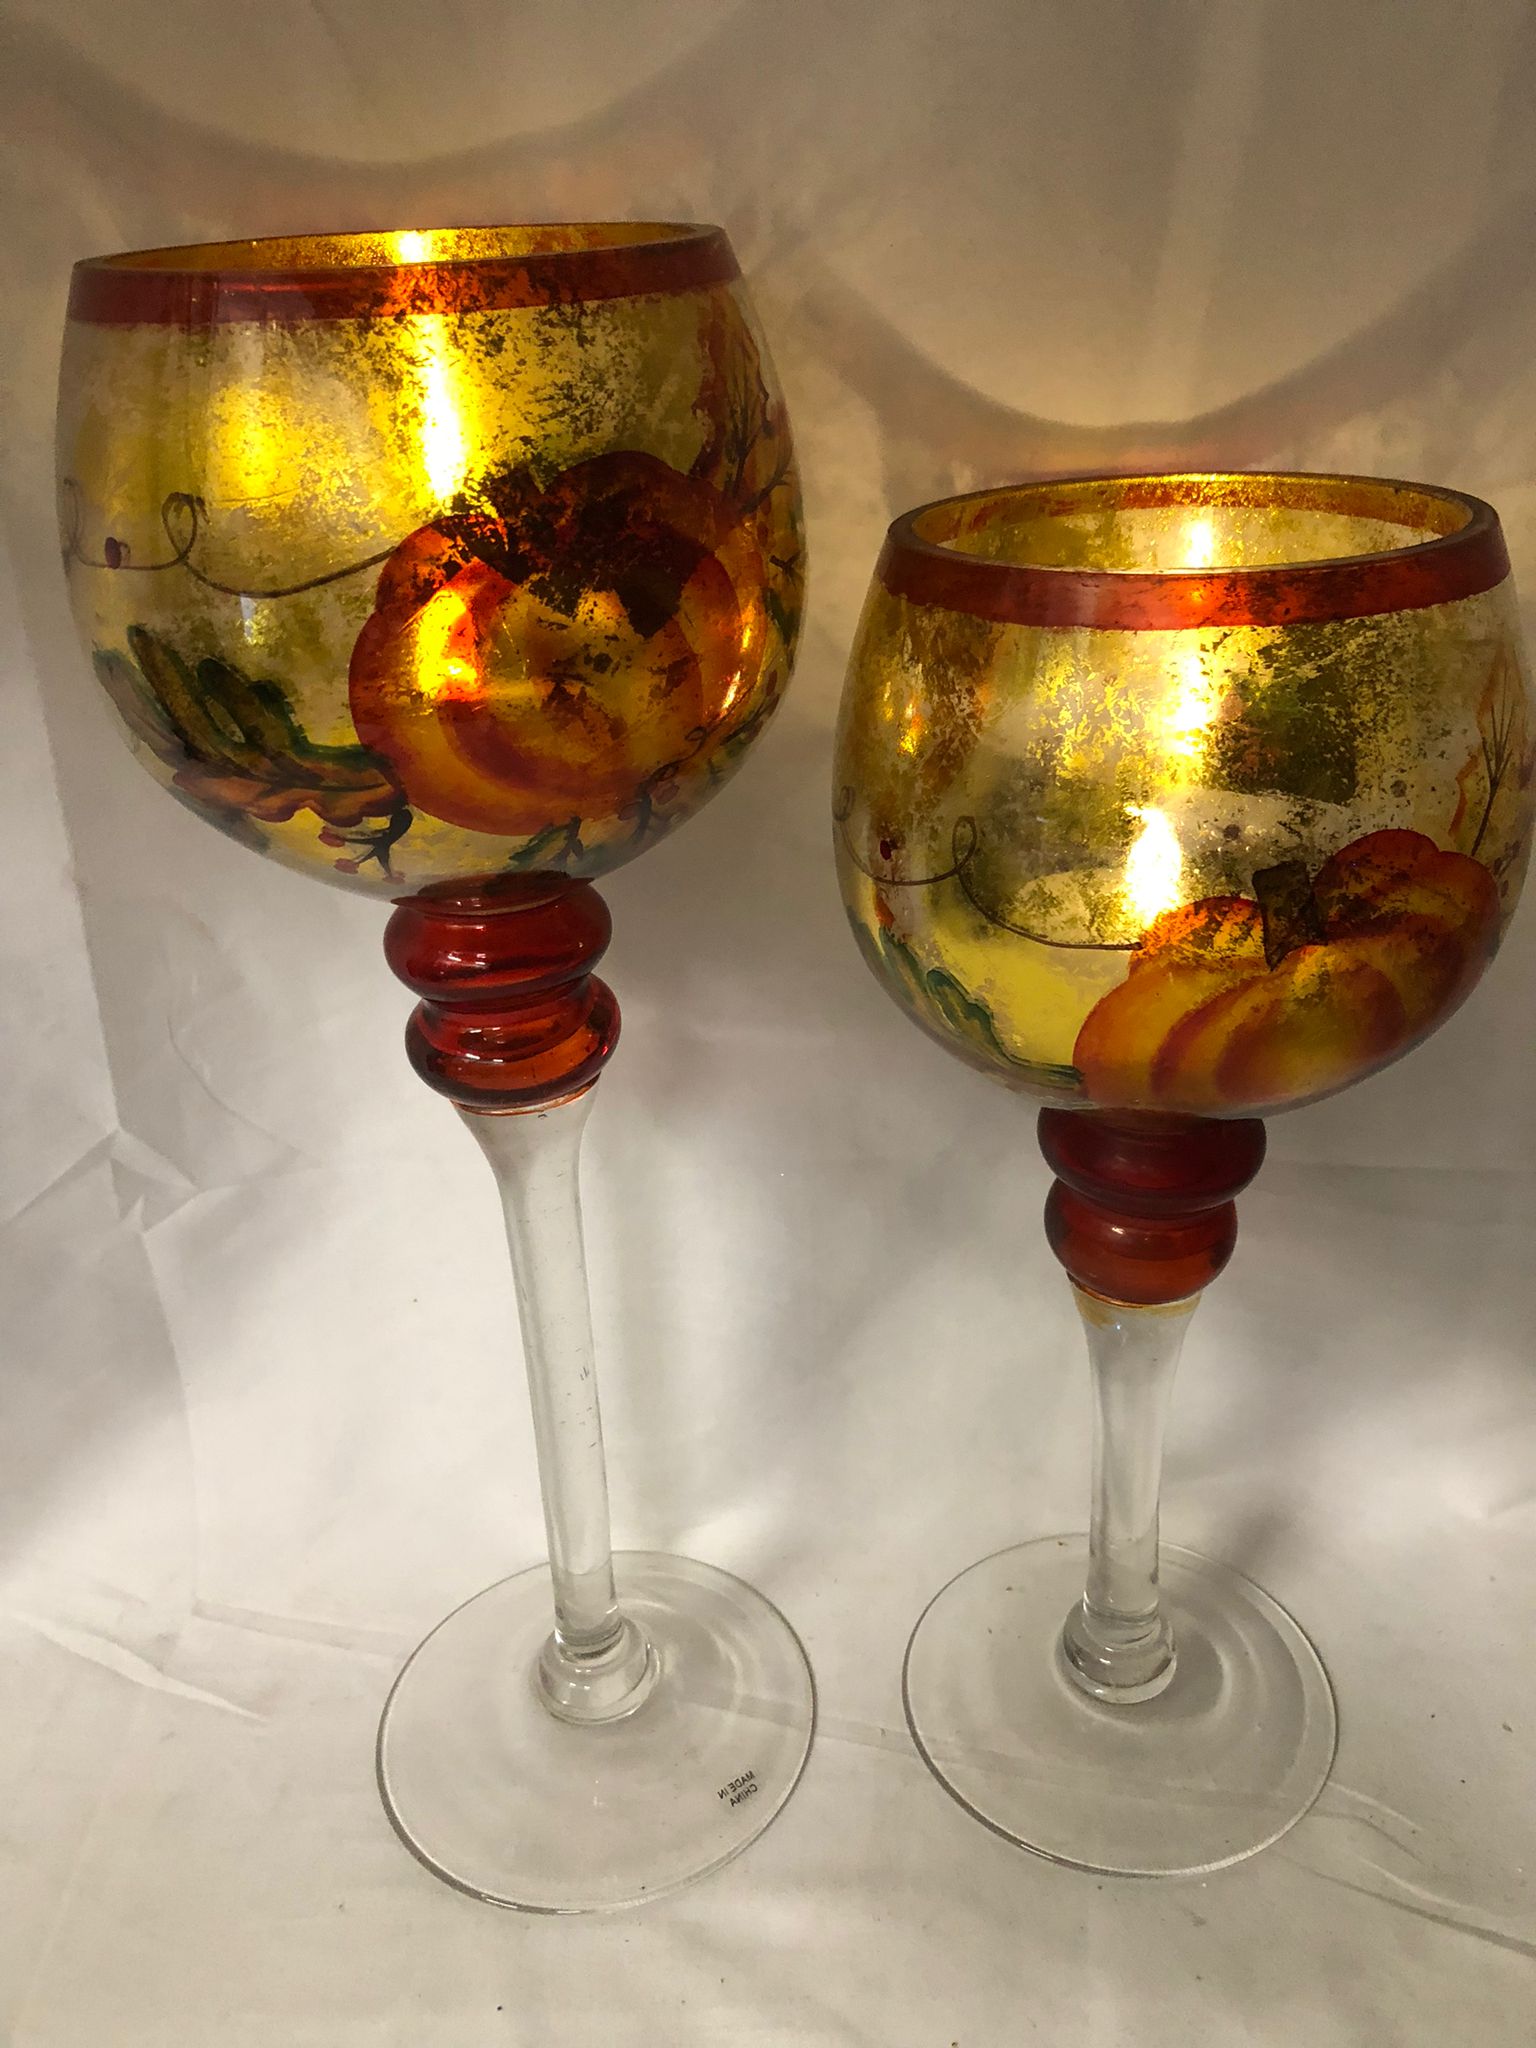 Set of 2 Illuminated Glass Goblets with Tealights by Valerie